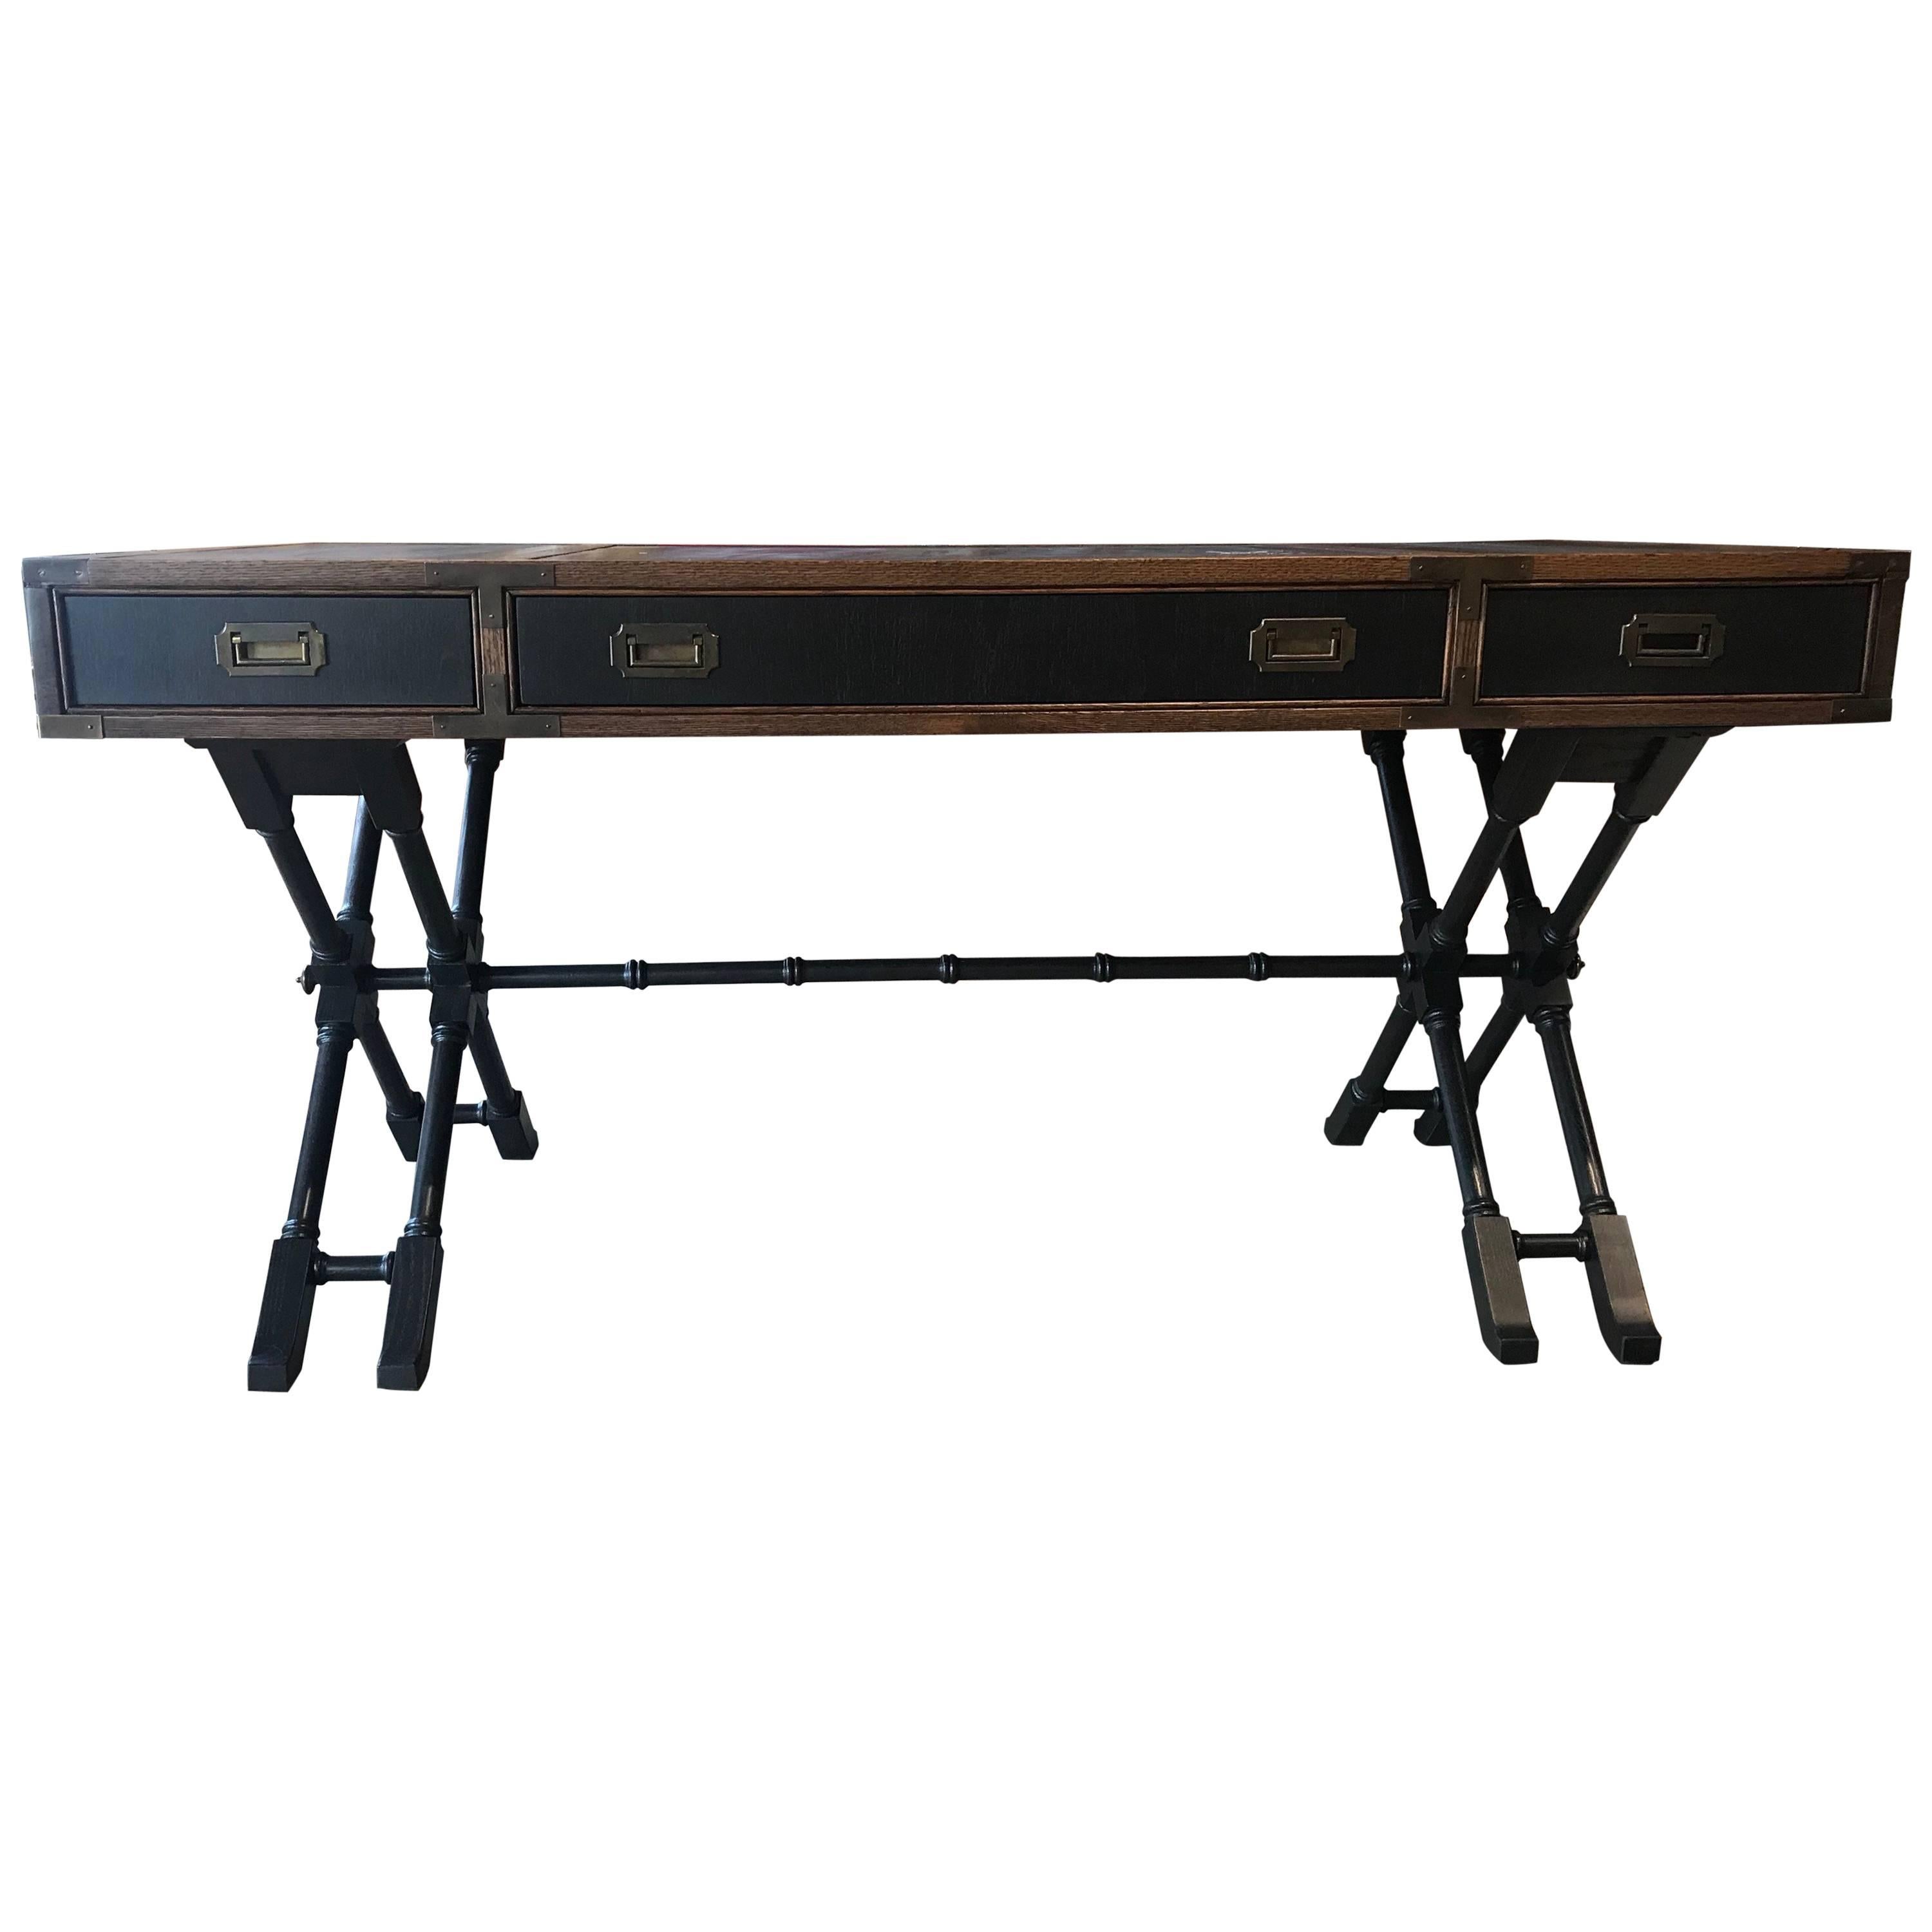 Modern Campaign style faux bamboo desk with leather inserts by Brandt Furniture Co, and attributed to Baker furniture. Outfitted with brass hardware. 